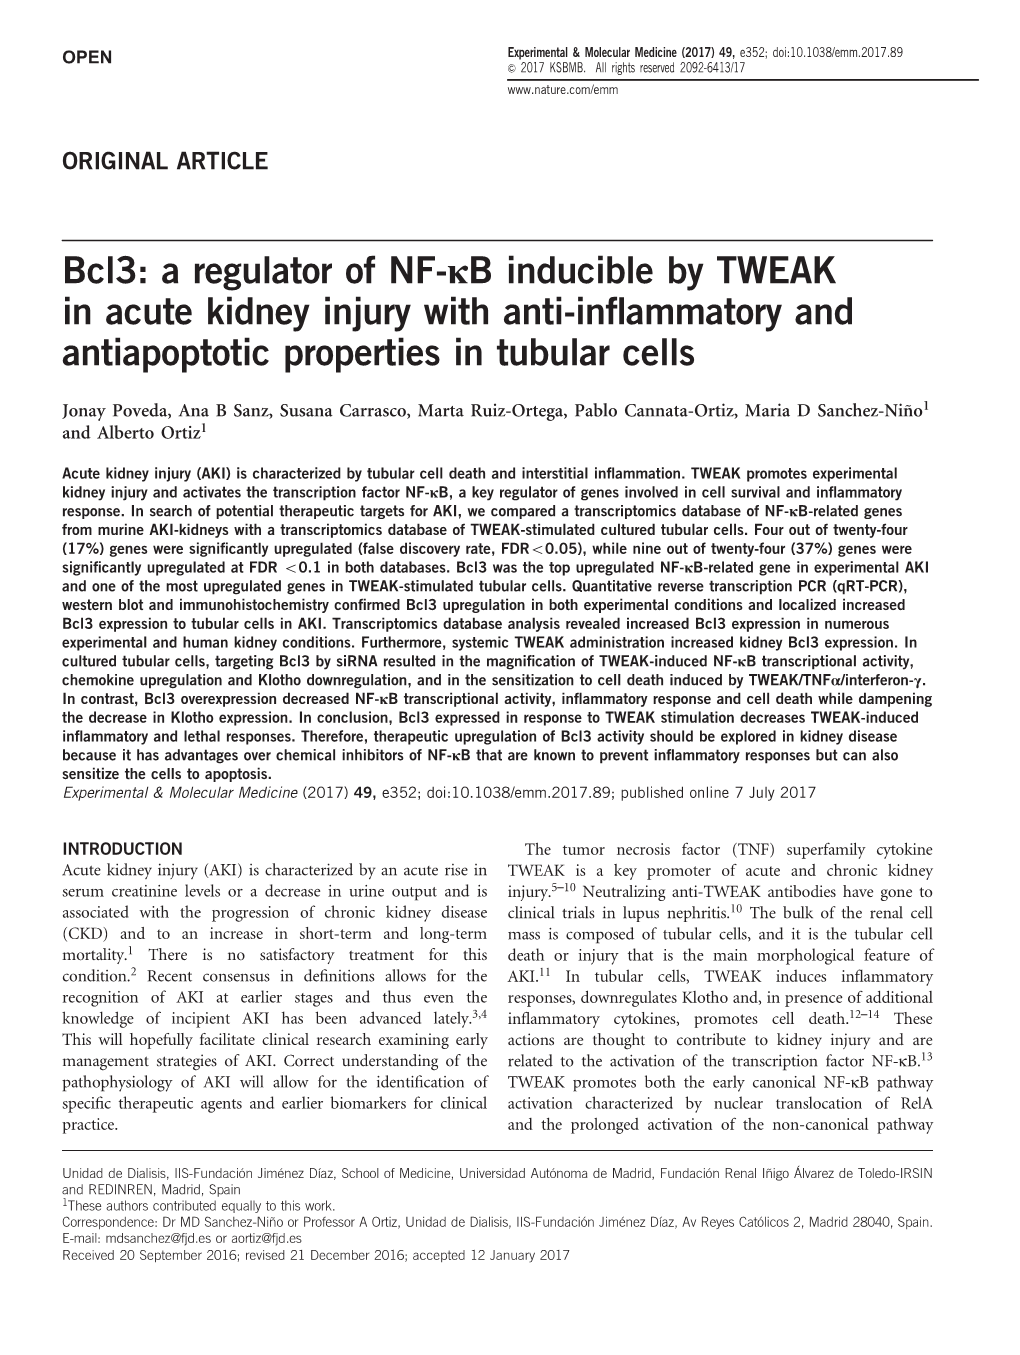 Bcl3: a Regulator of NF-Κb Inducible by TWEAK in Acute Kidney Injury with Anti-Inﬂammatory and Antiapoptotic Properties in Tubular Cells